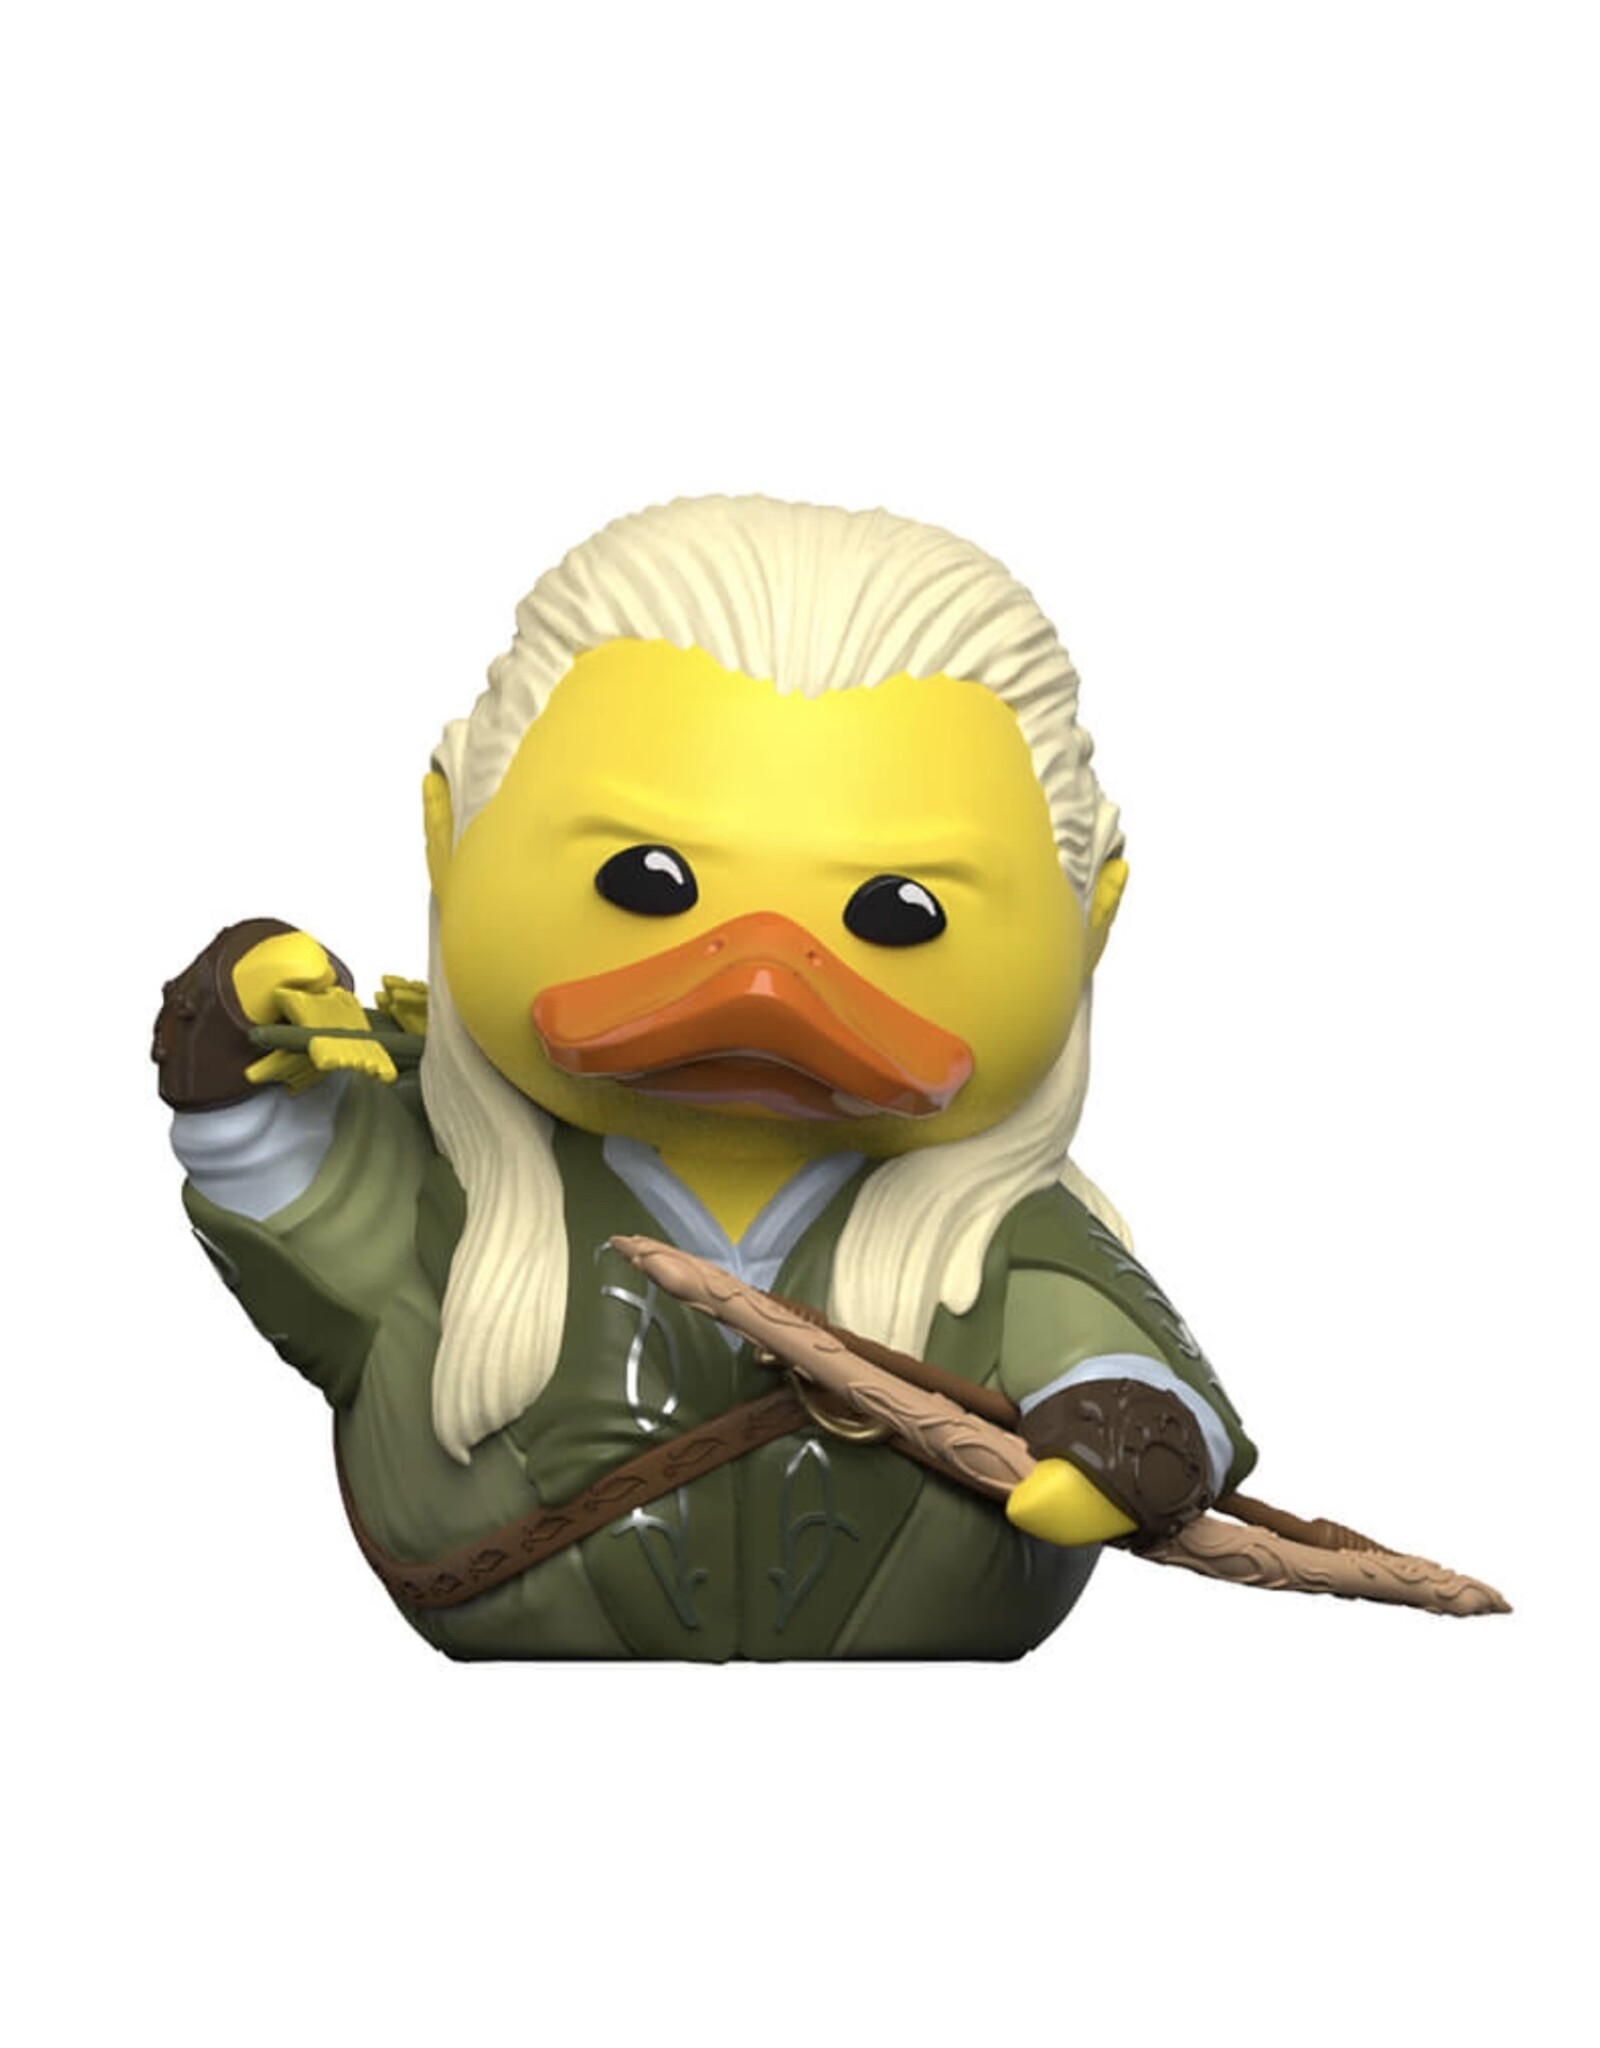 Tubbz Lord of the Rings Legolas Rubber Duck  - Boxed Edition